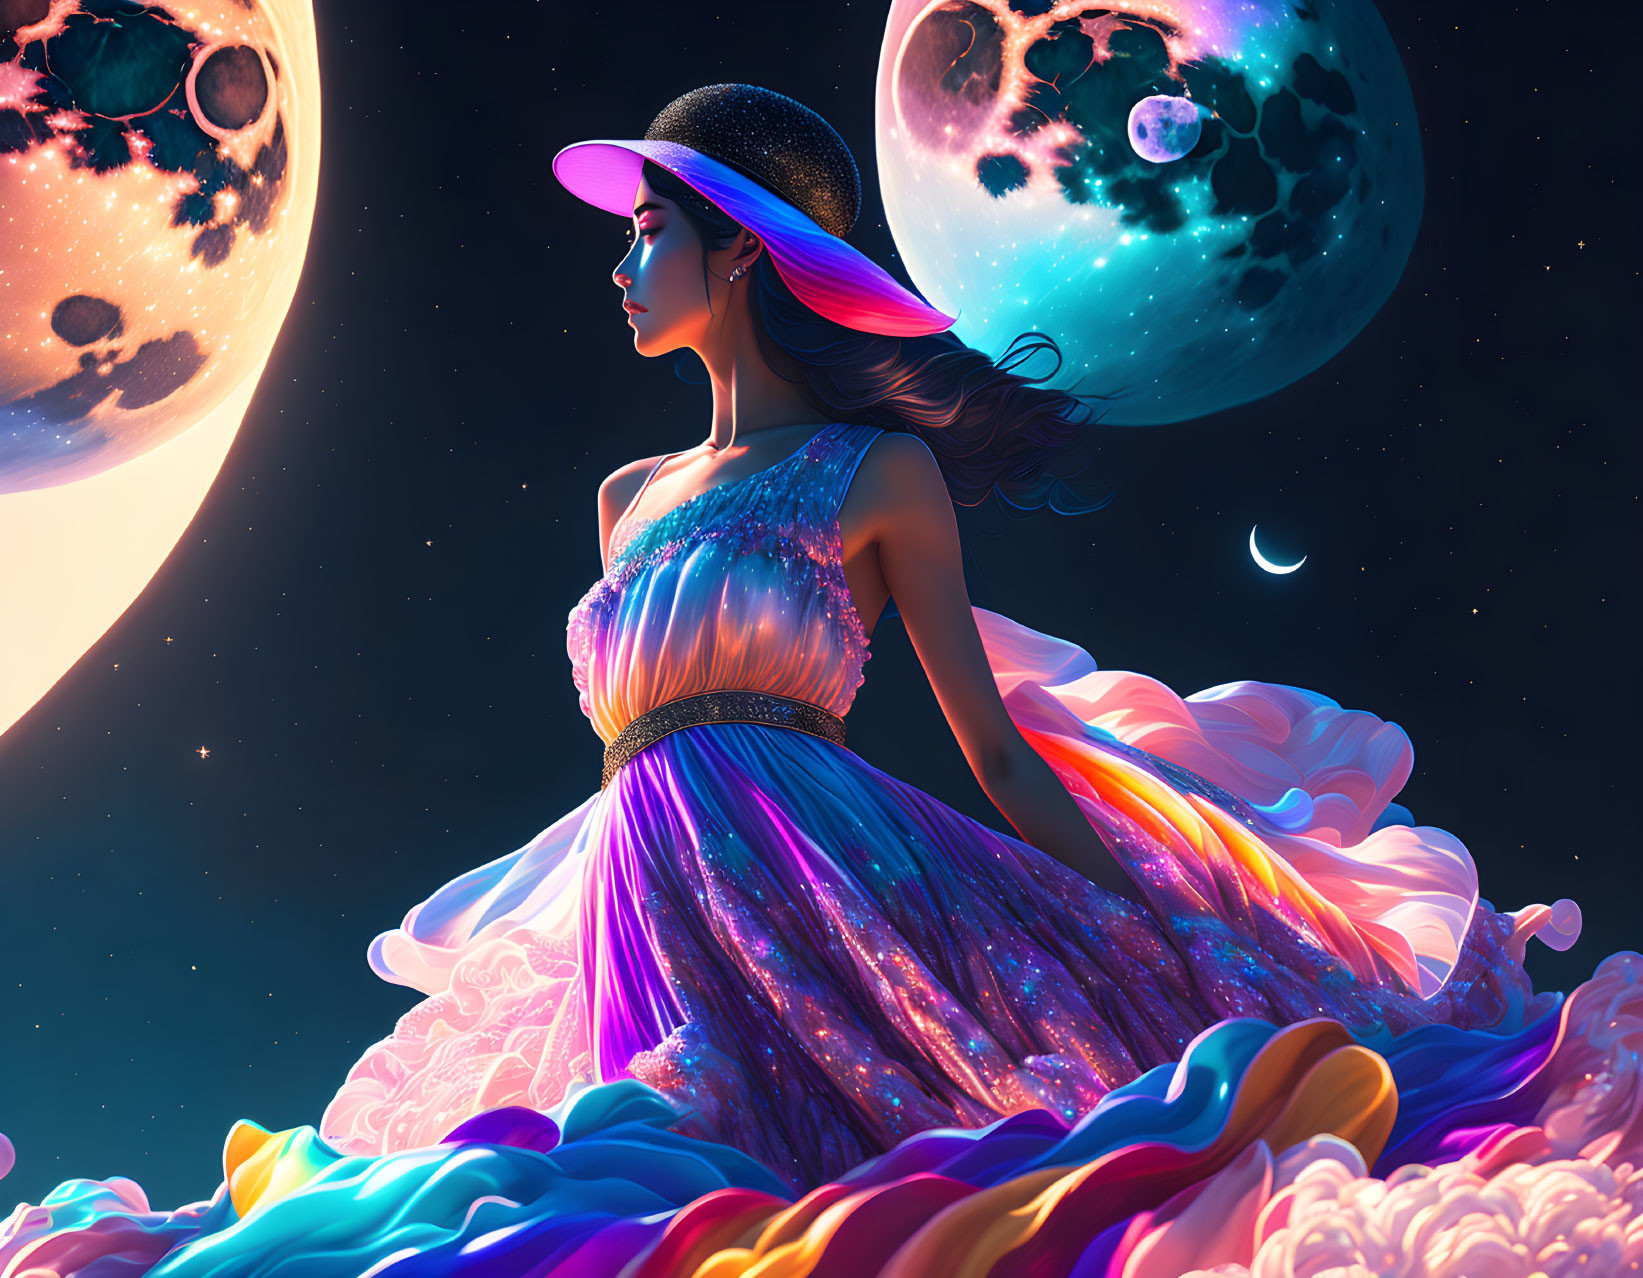 Colorful Woman in Flowing Dress Amid Cosmic Planets and Stars